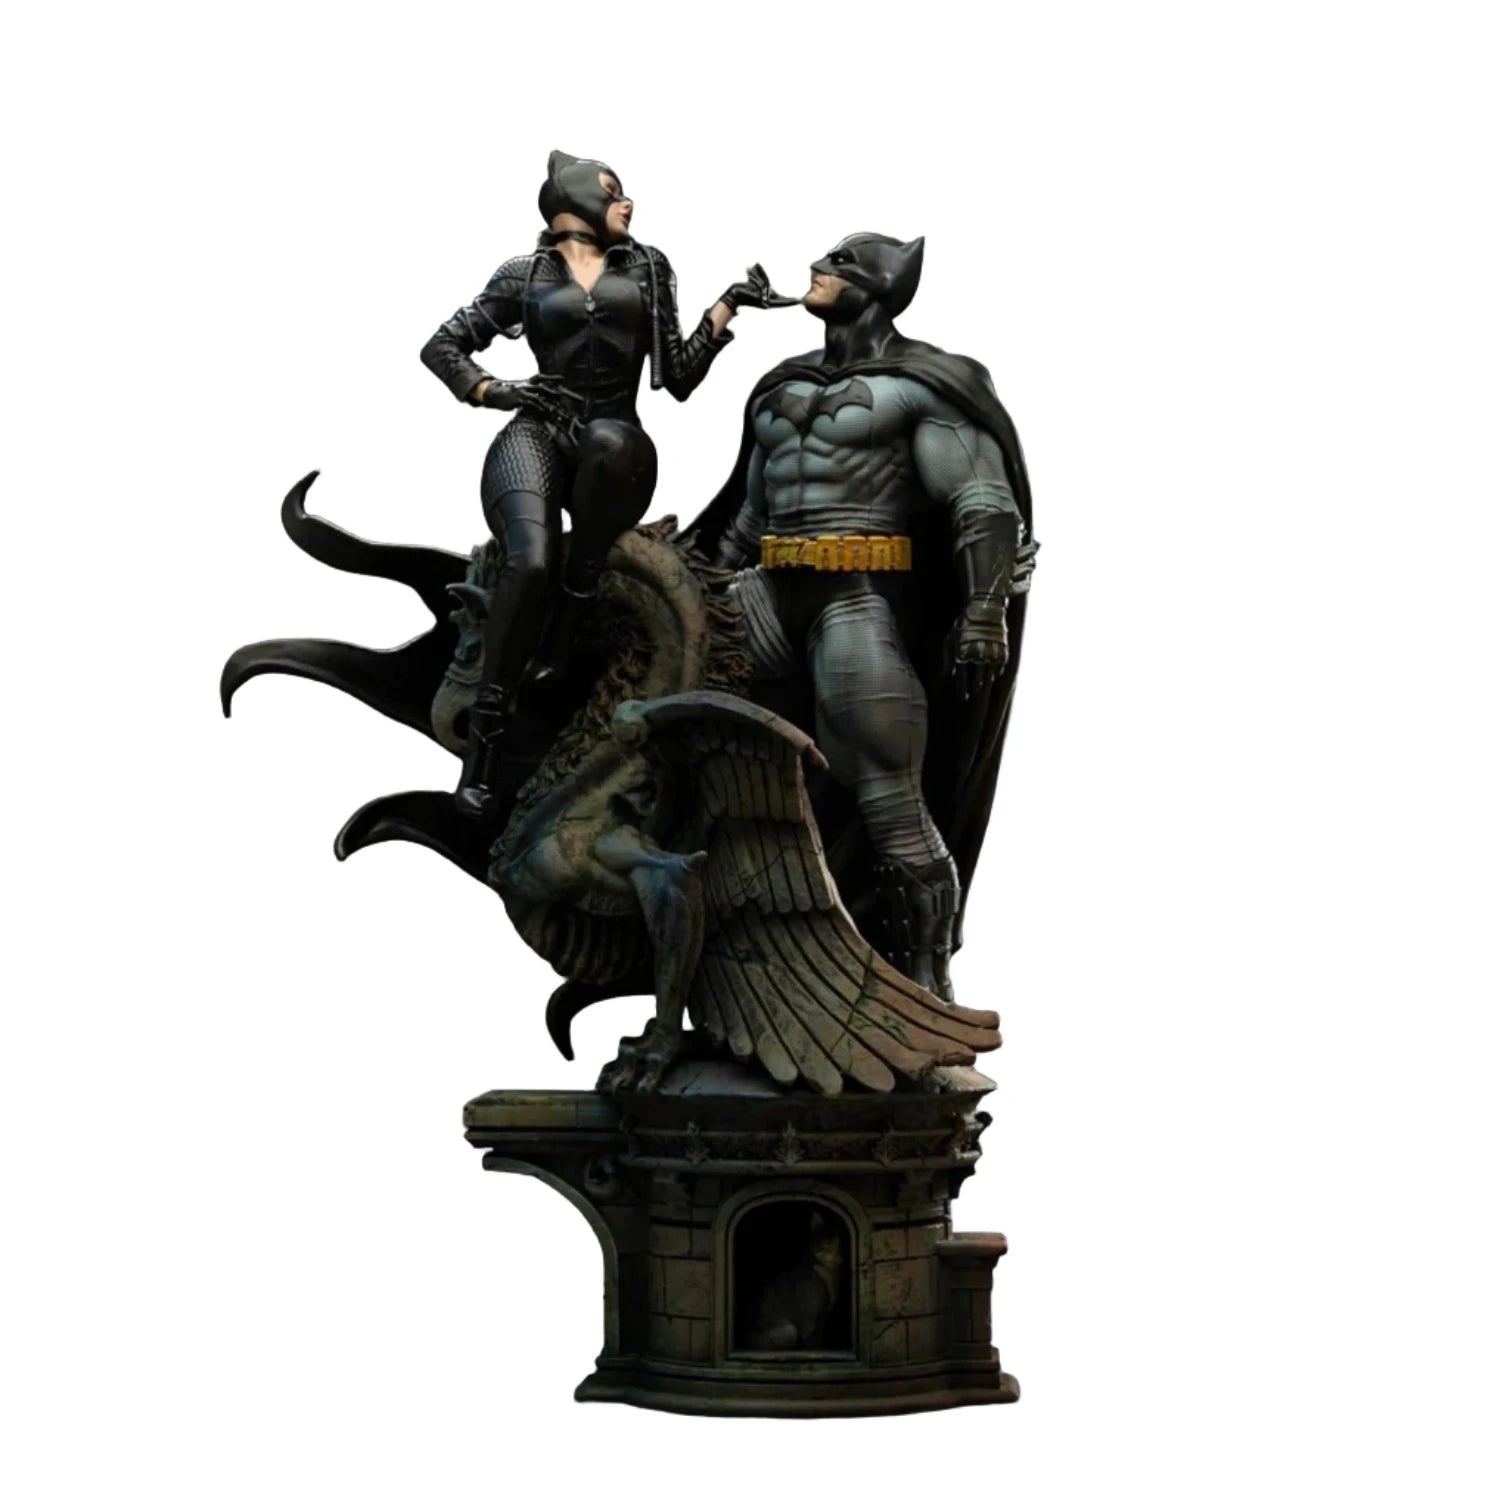 Batman and Catwoman 1/6 Diorama by Iron Studios